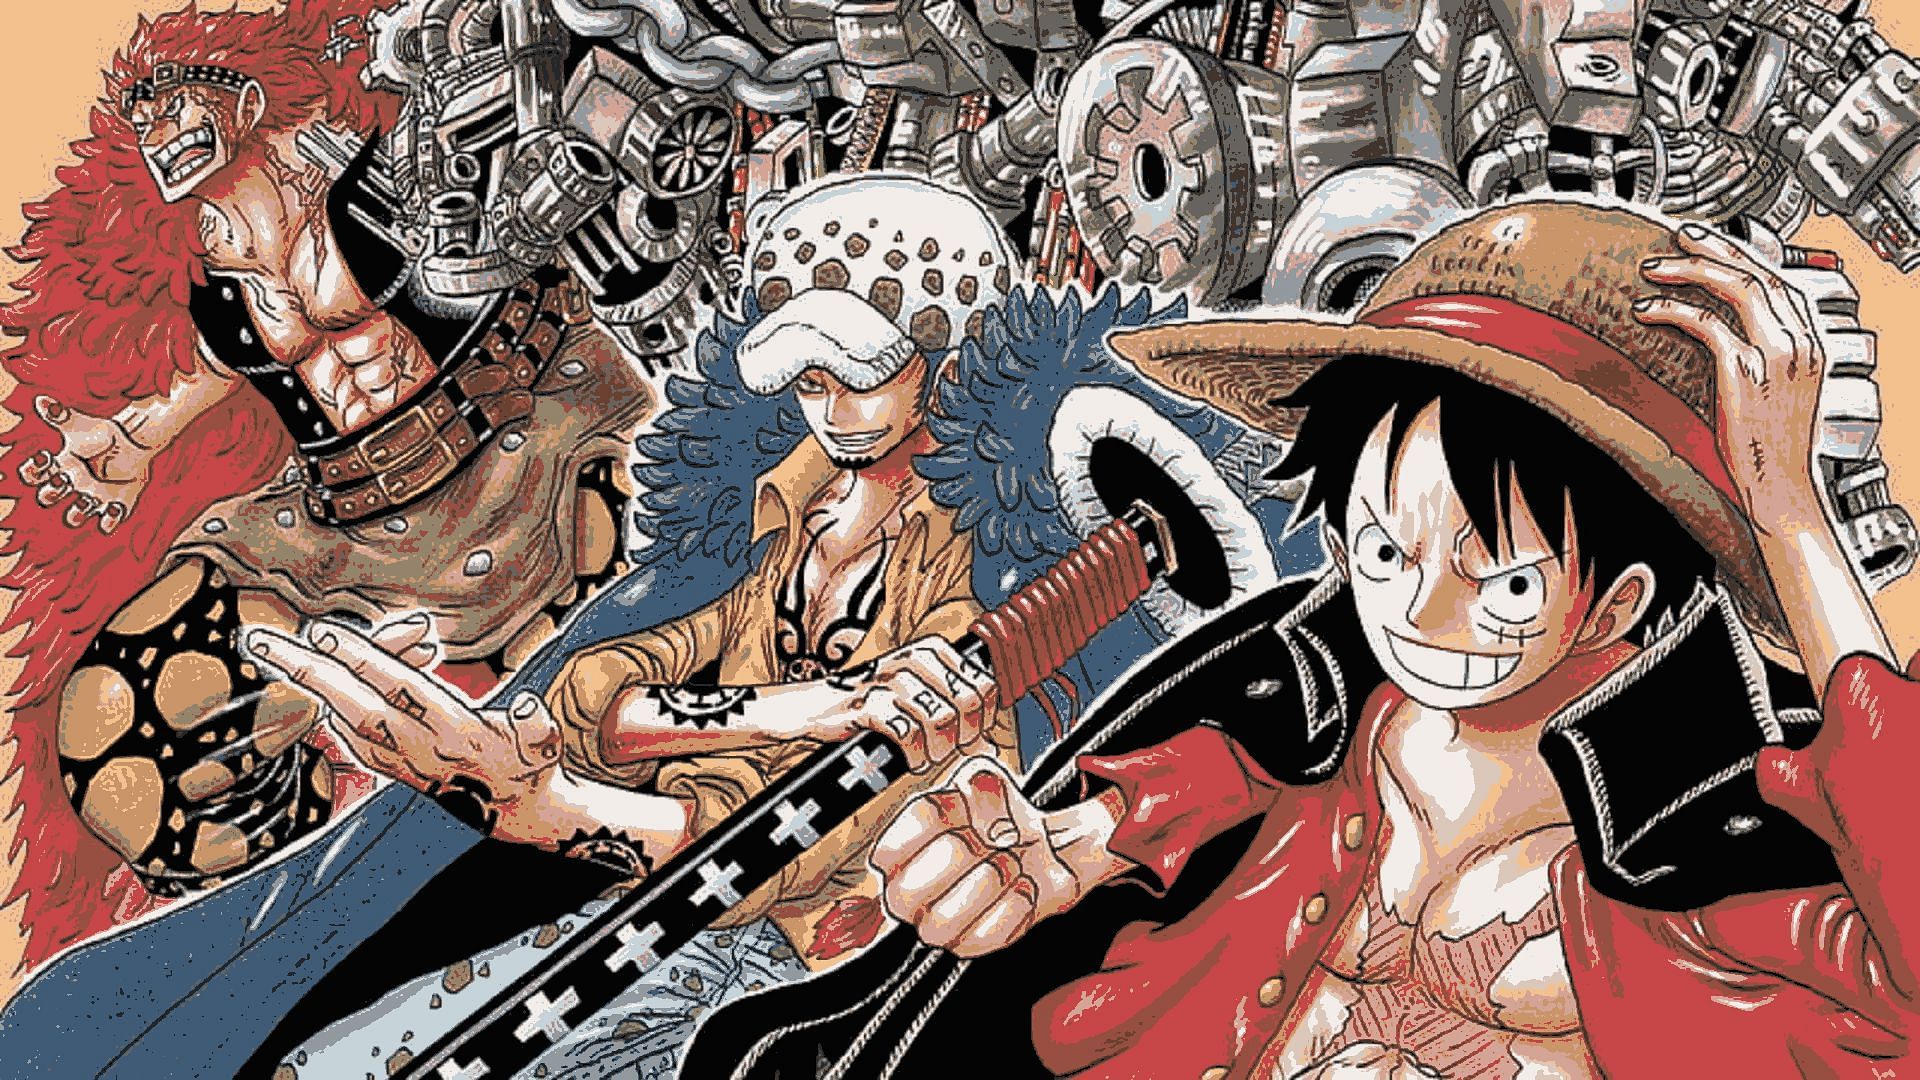 Chapter 1017, One Piece Wiki